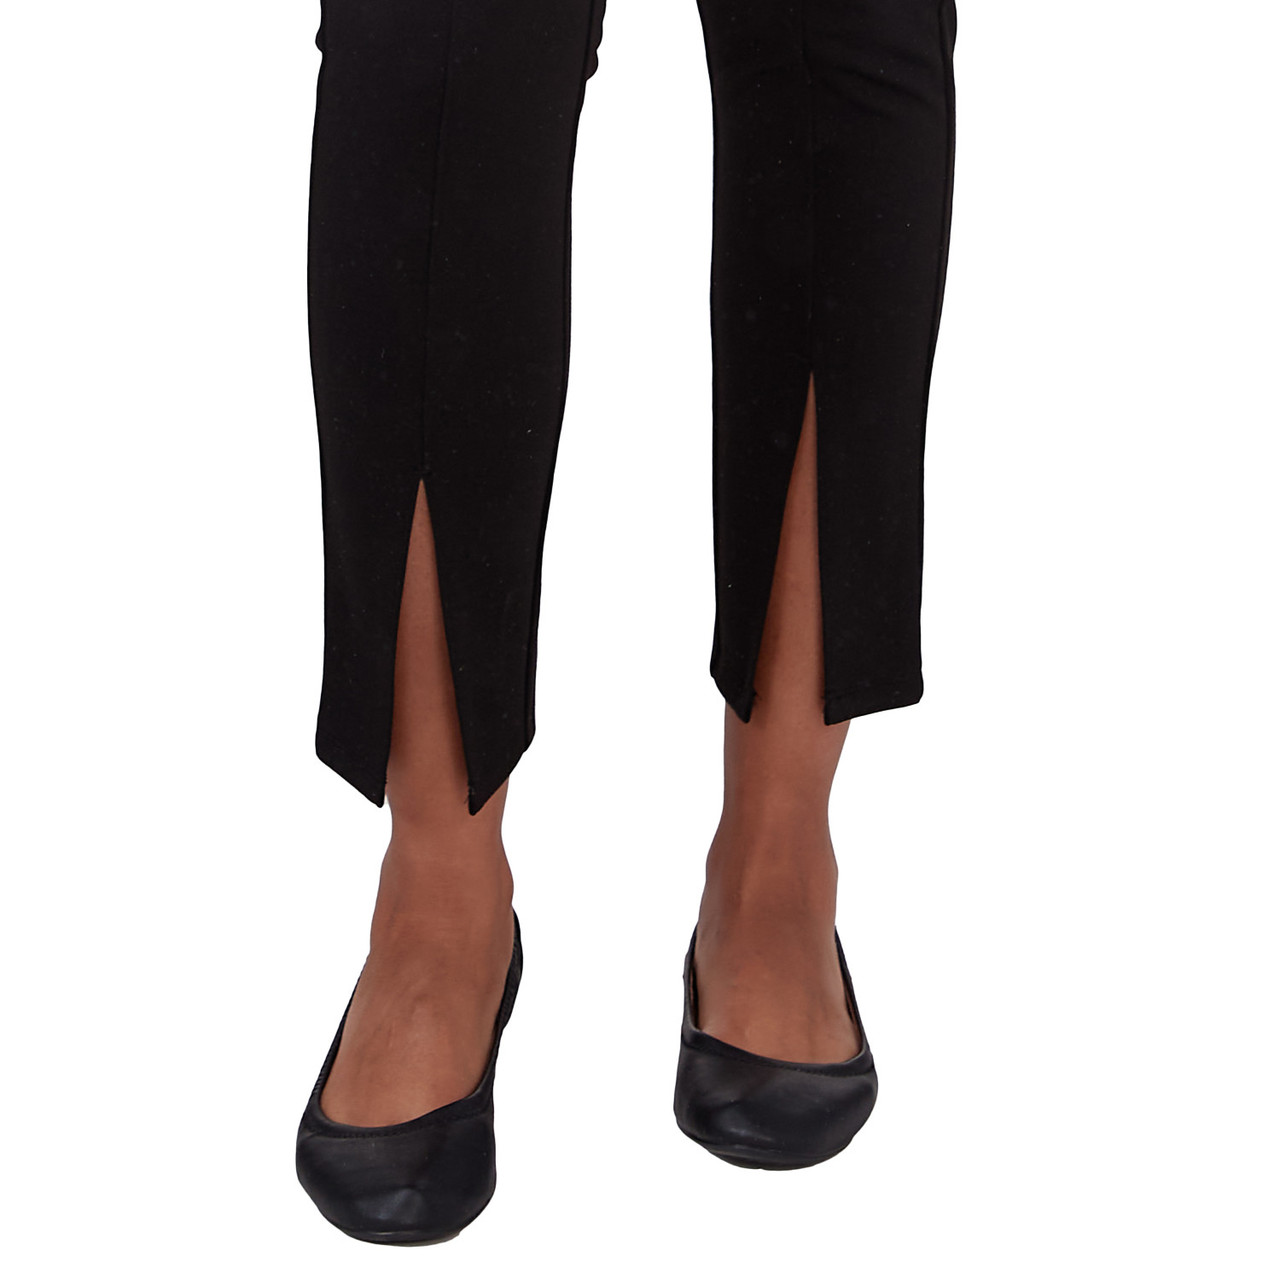 Petite Women's Solid Ponte Pant With Front Slit